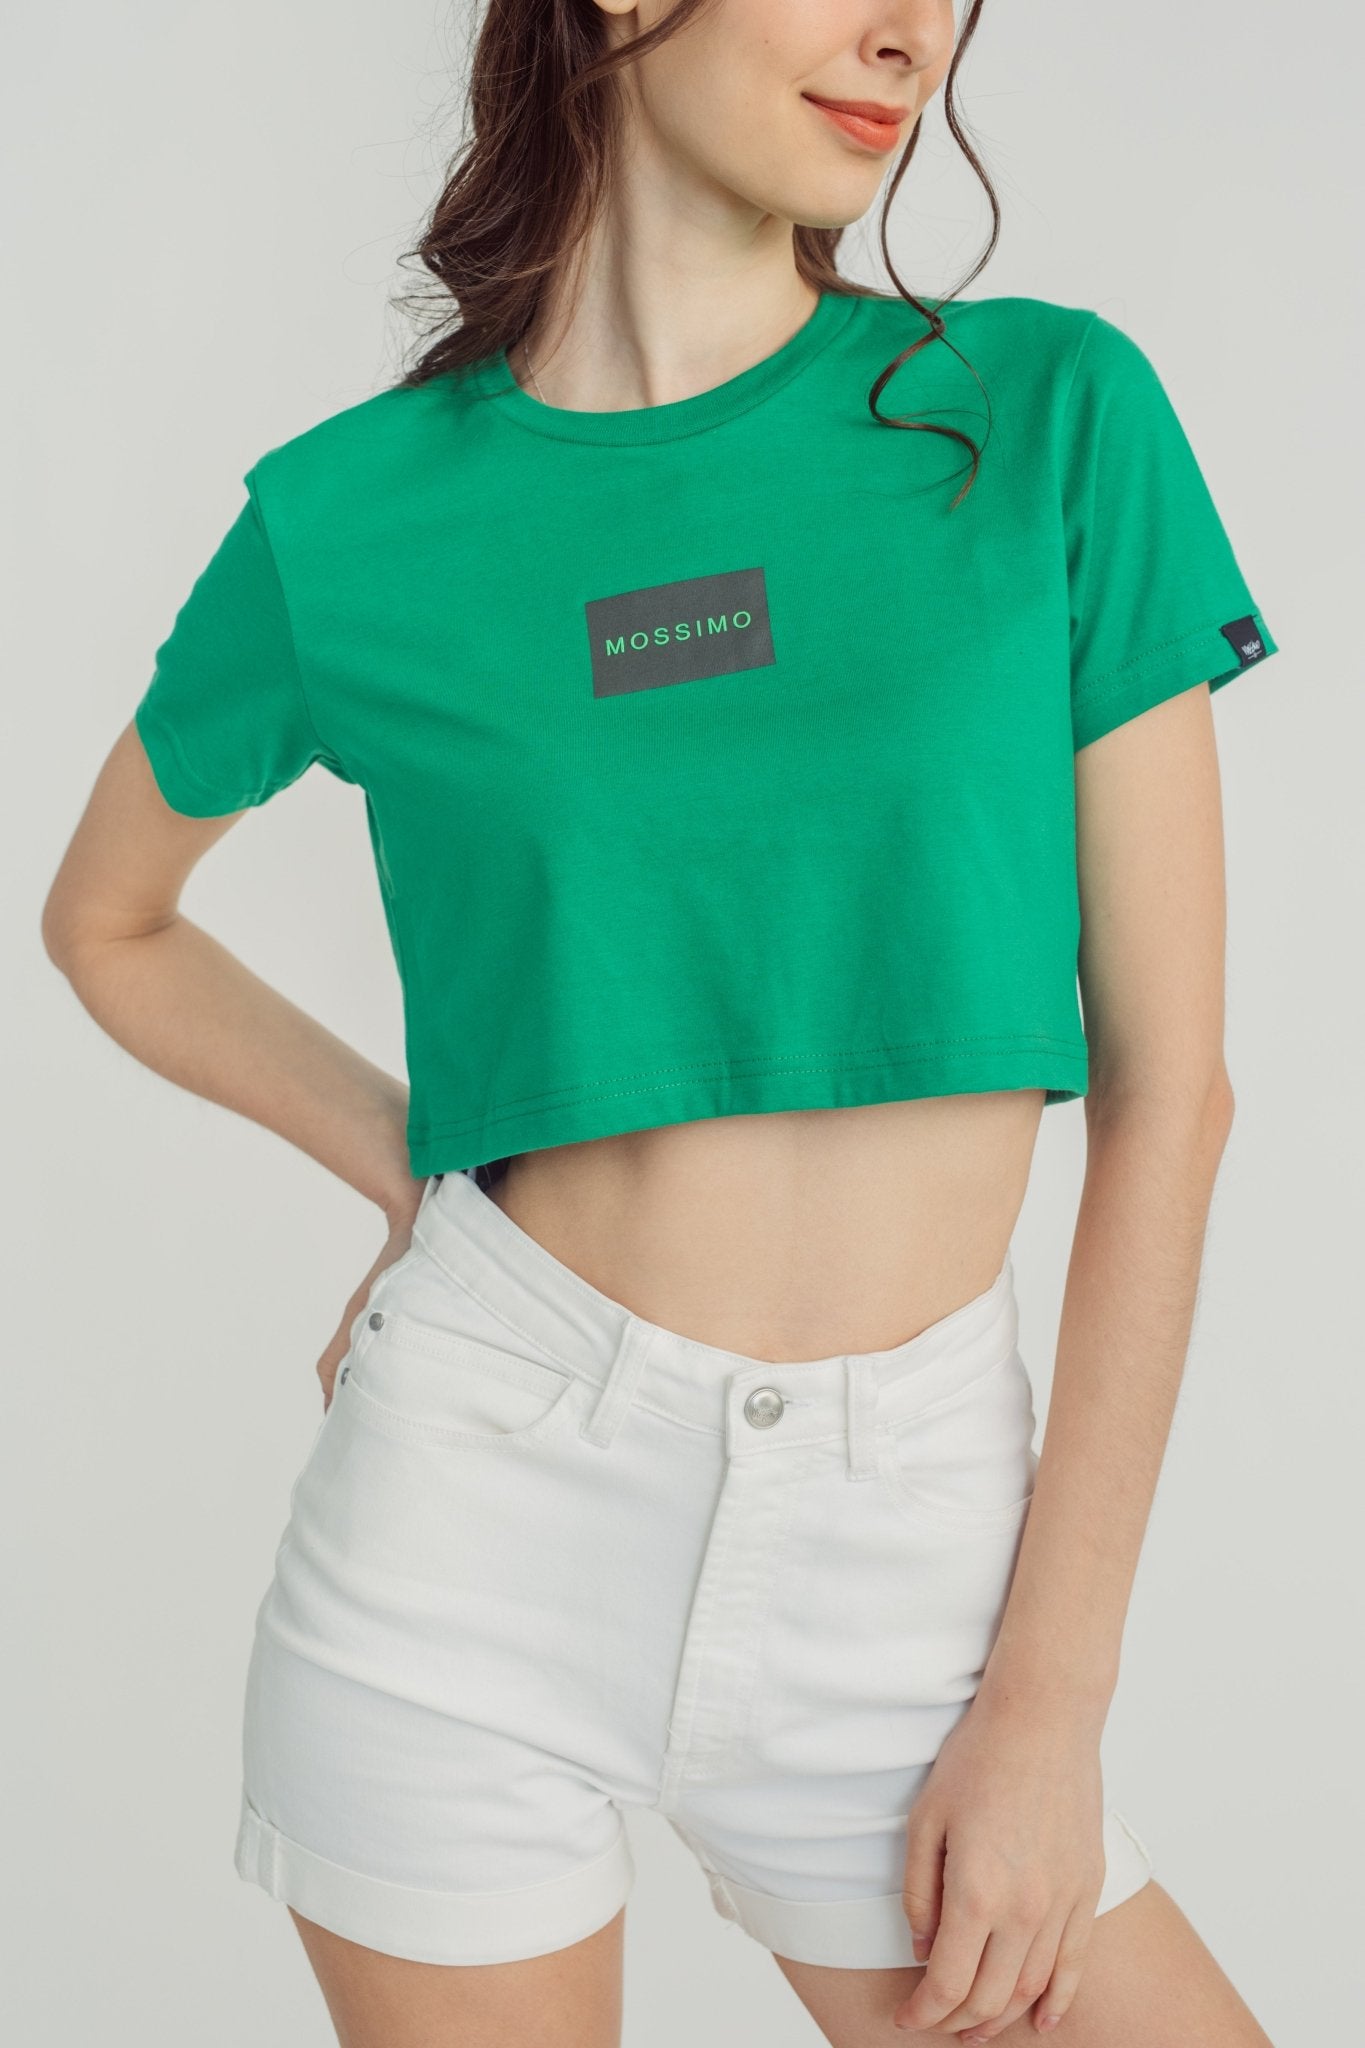 Jelly Bean with Small Branding Mossimo Boxed Design Vintage Cropped Fit Tee - Mossimo PH